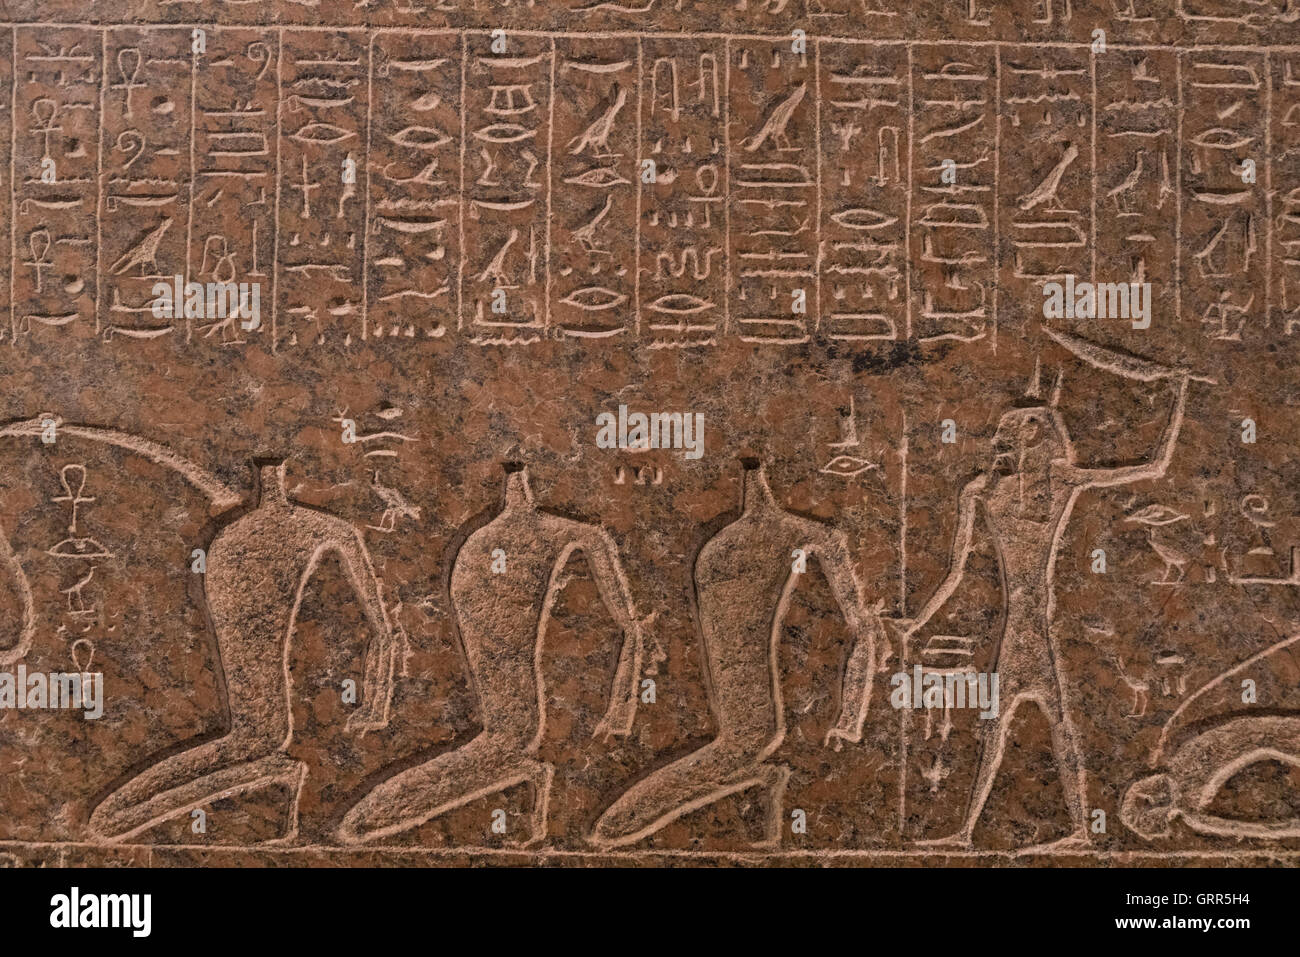 Egyptian hieroglyphics on Sarcophagus of King Ramses III, at The Louvre Museum, Paris, France Stock Photo